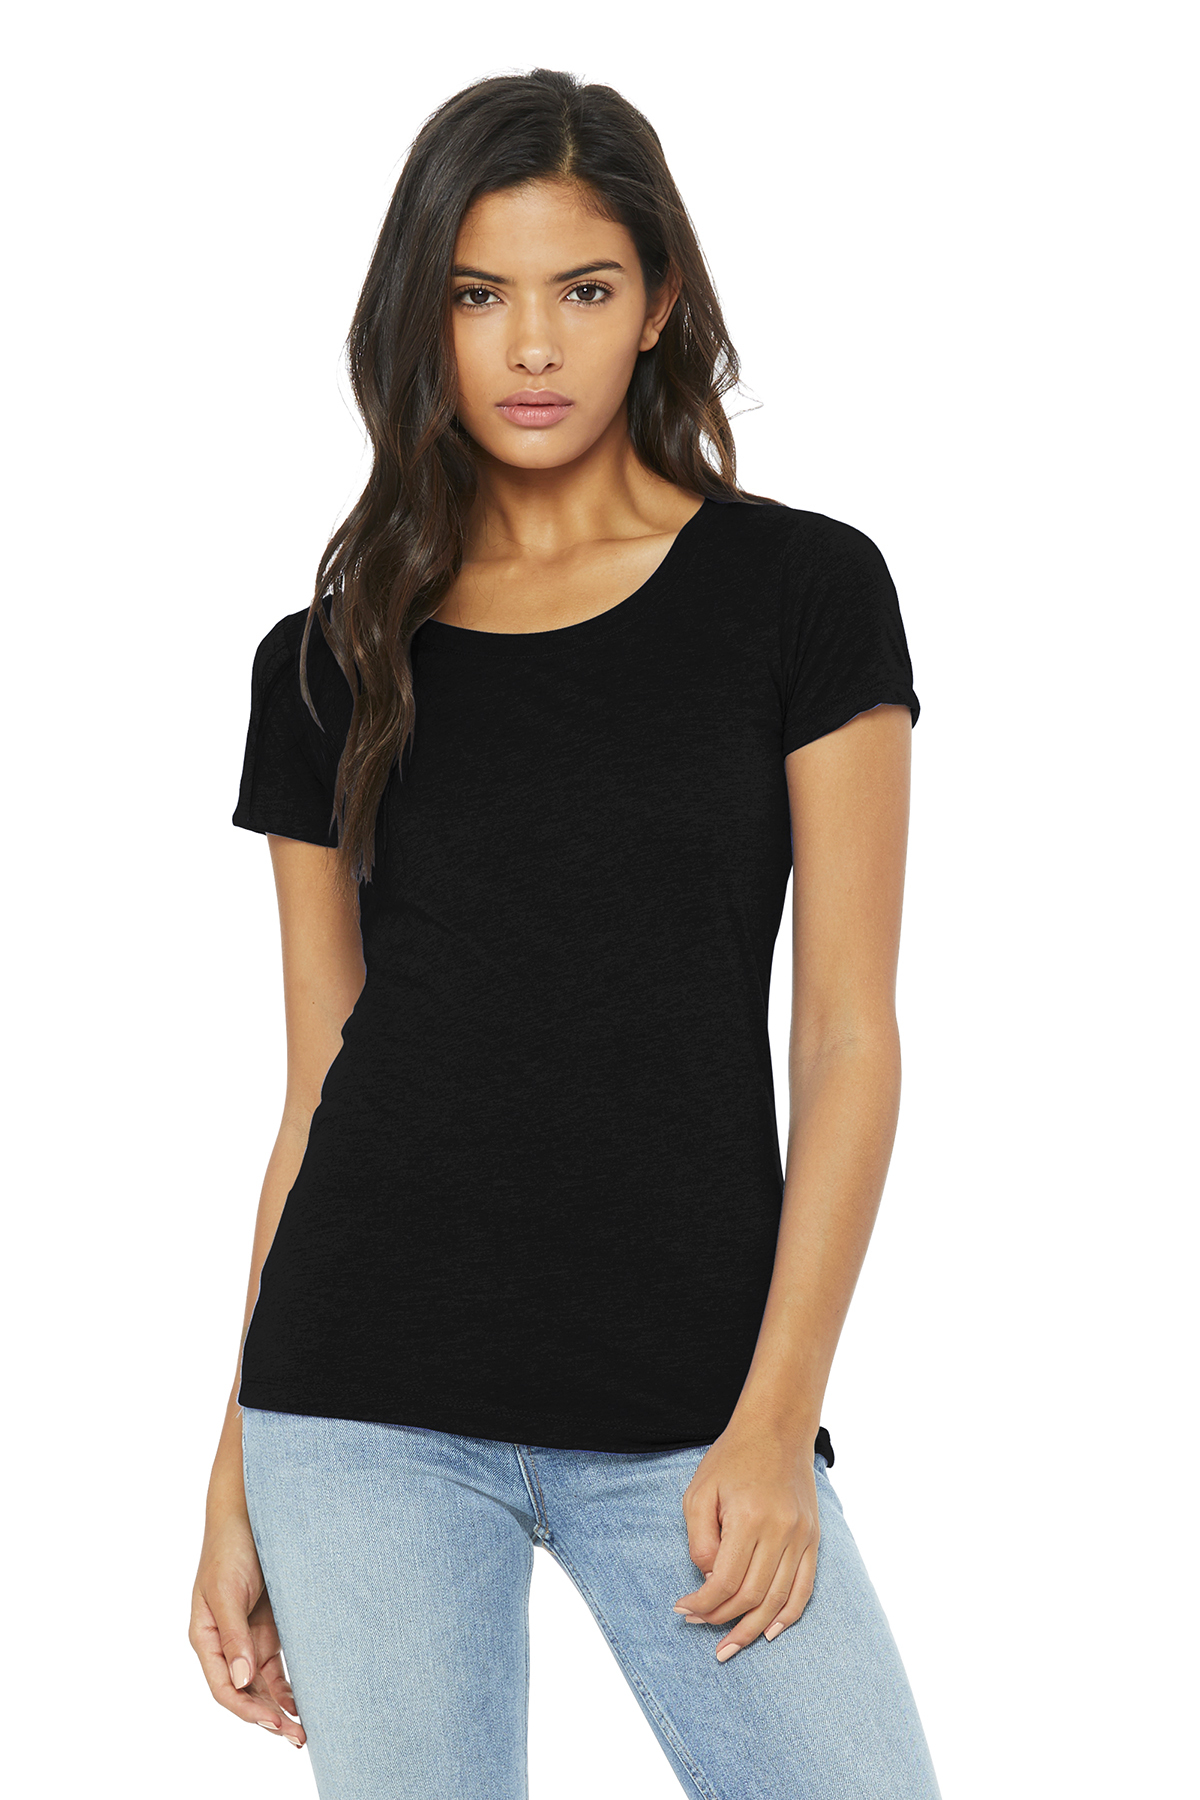 BELLA+CANVAS Women’s Triblend Short Sleeve Tee | Product | Company Casuals